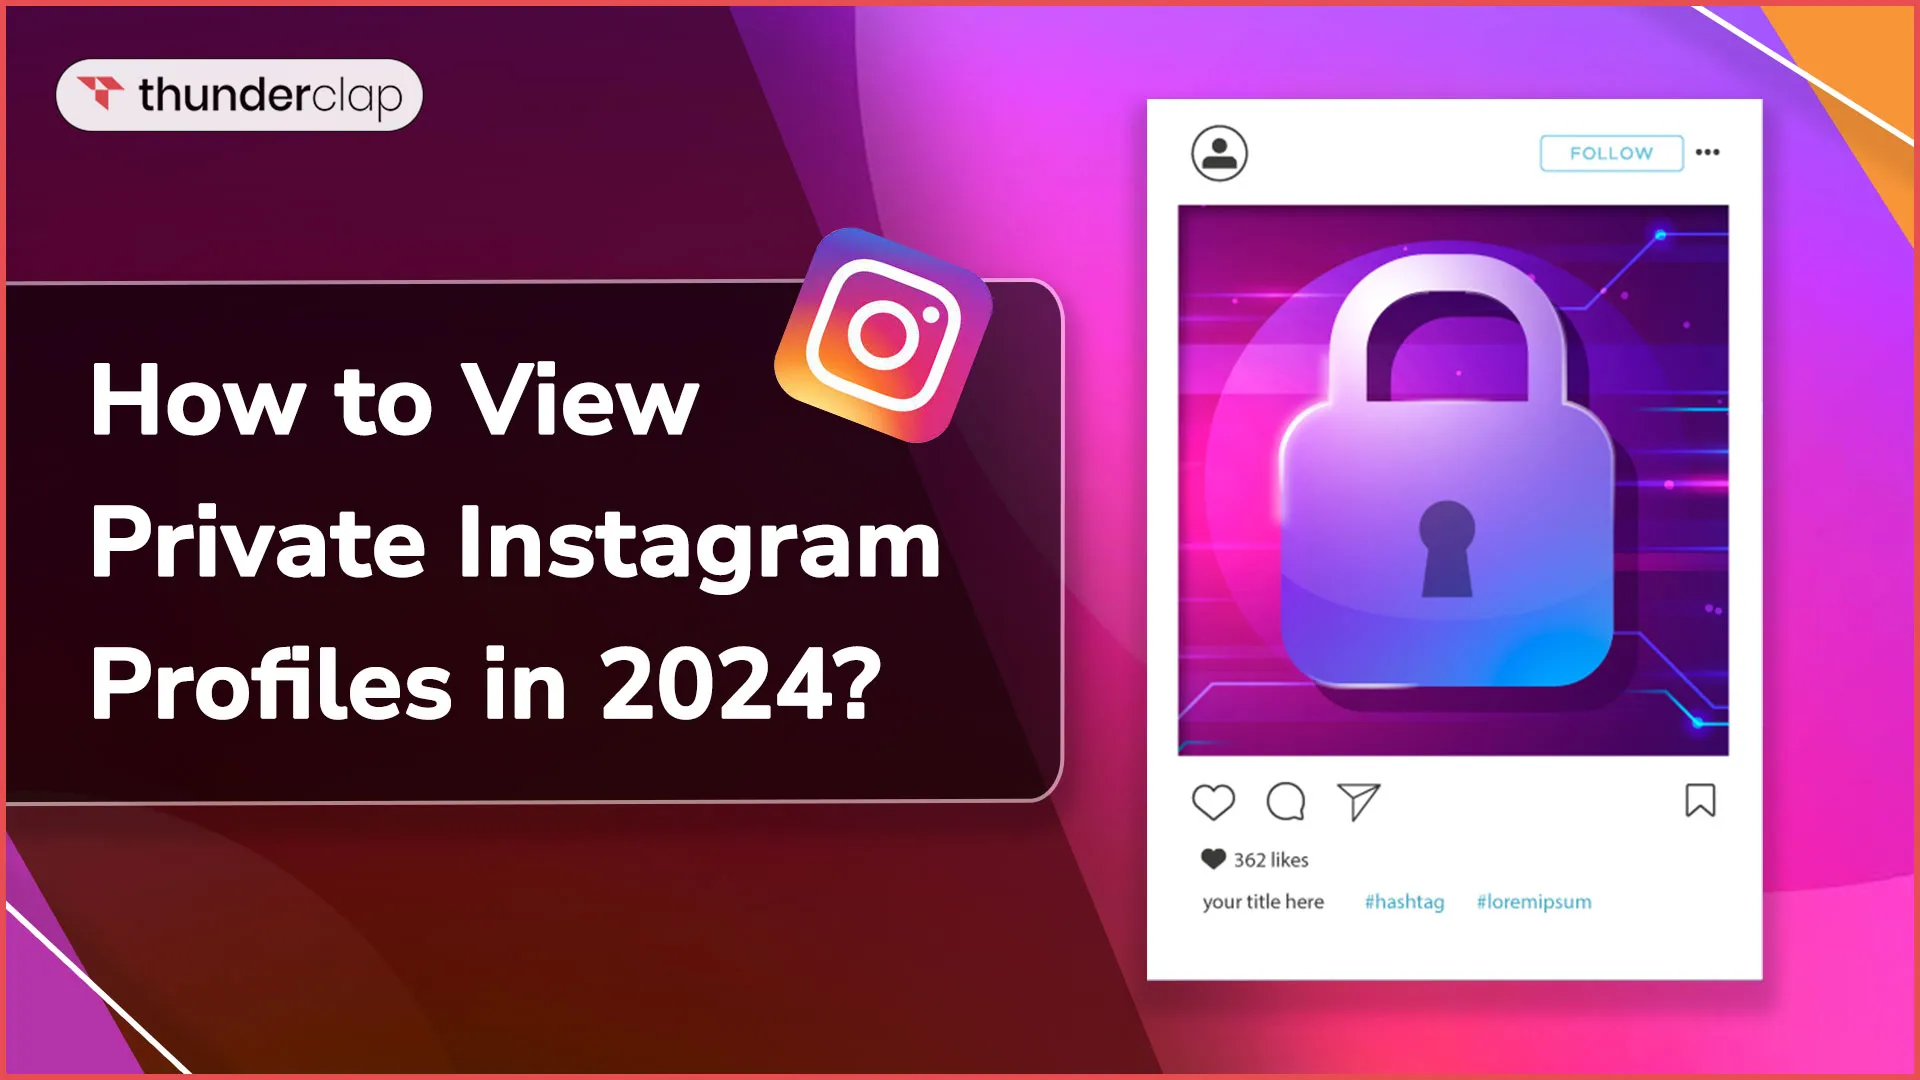 How to View Private Instagram Profiles?